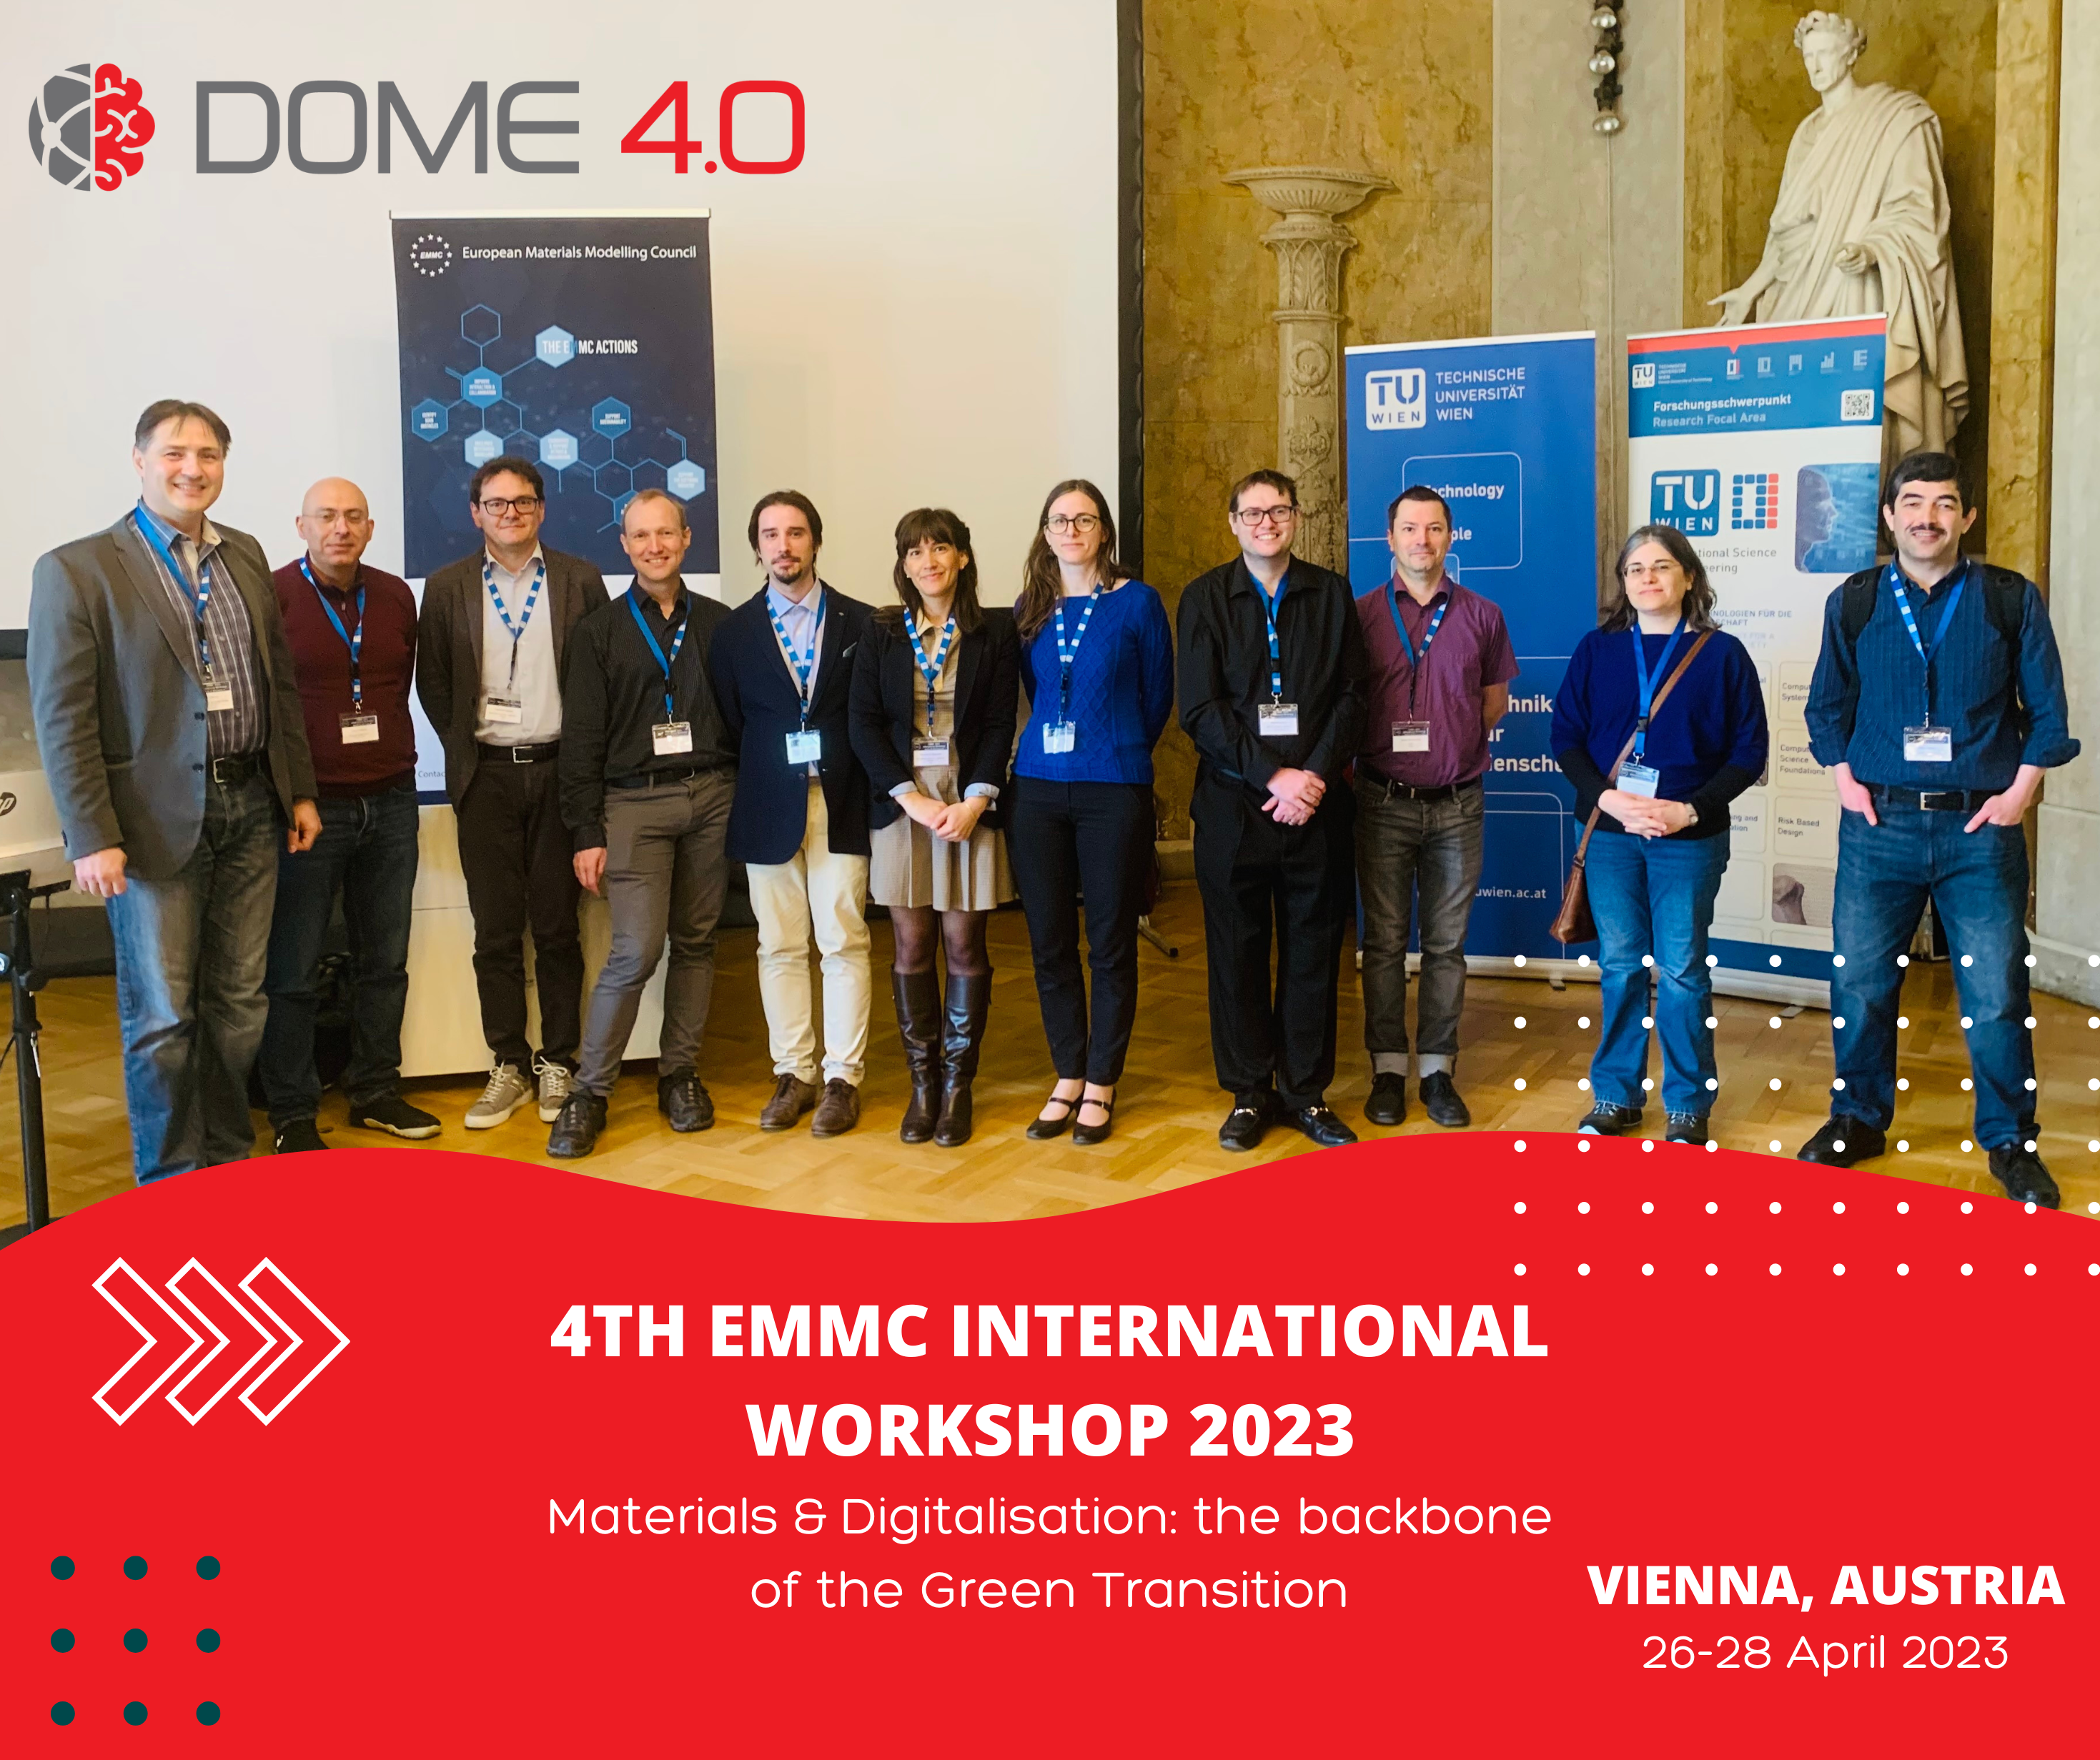 DOME 4.0 project made a strong showing at the 4th EMMC International Workshop